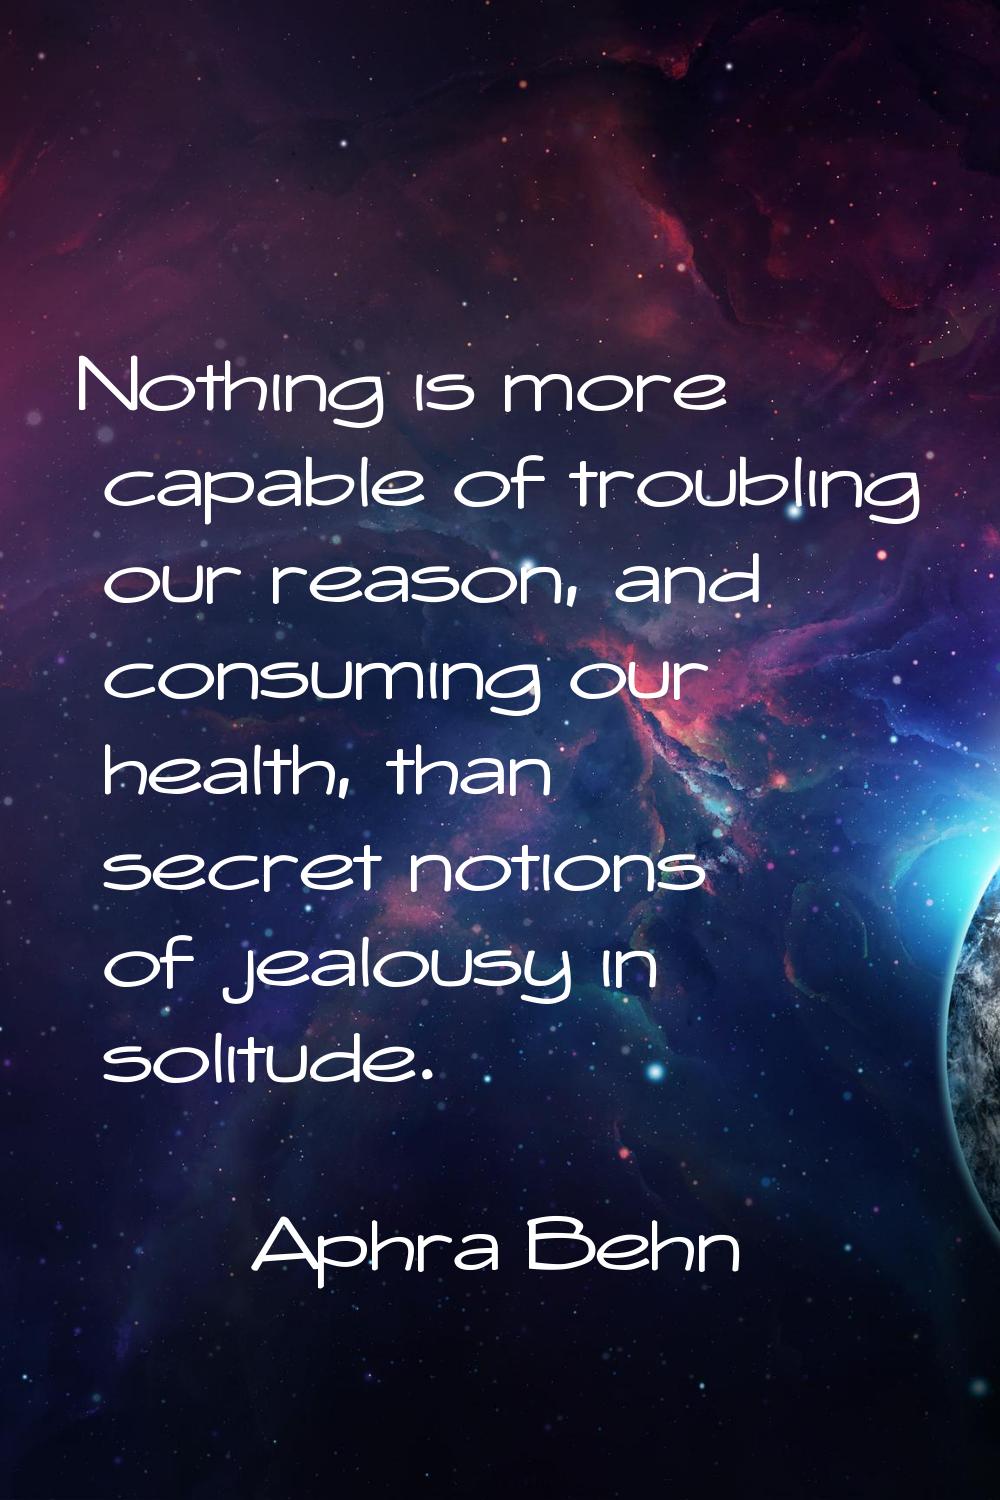 Nothing is more capable of troubling our reason, and consuming our health, than secret notions of j